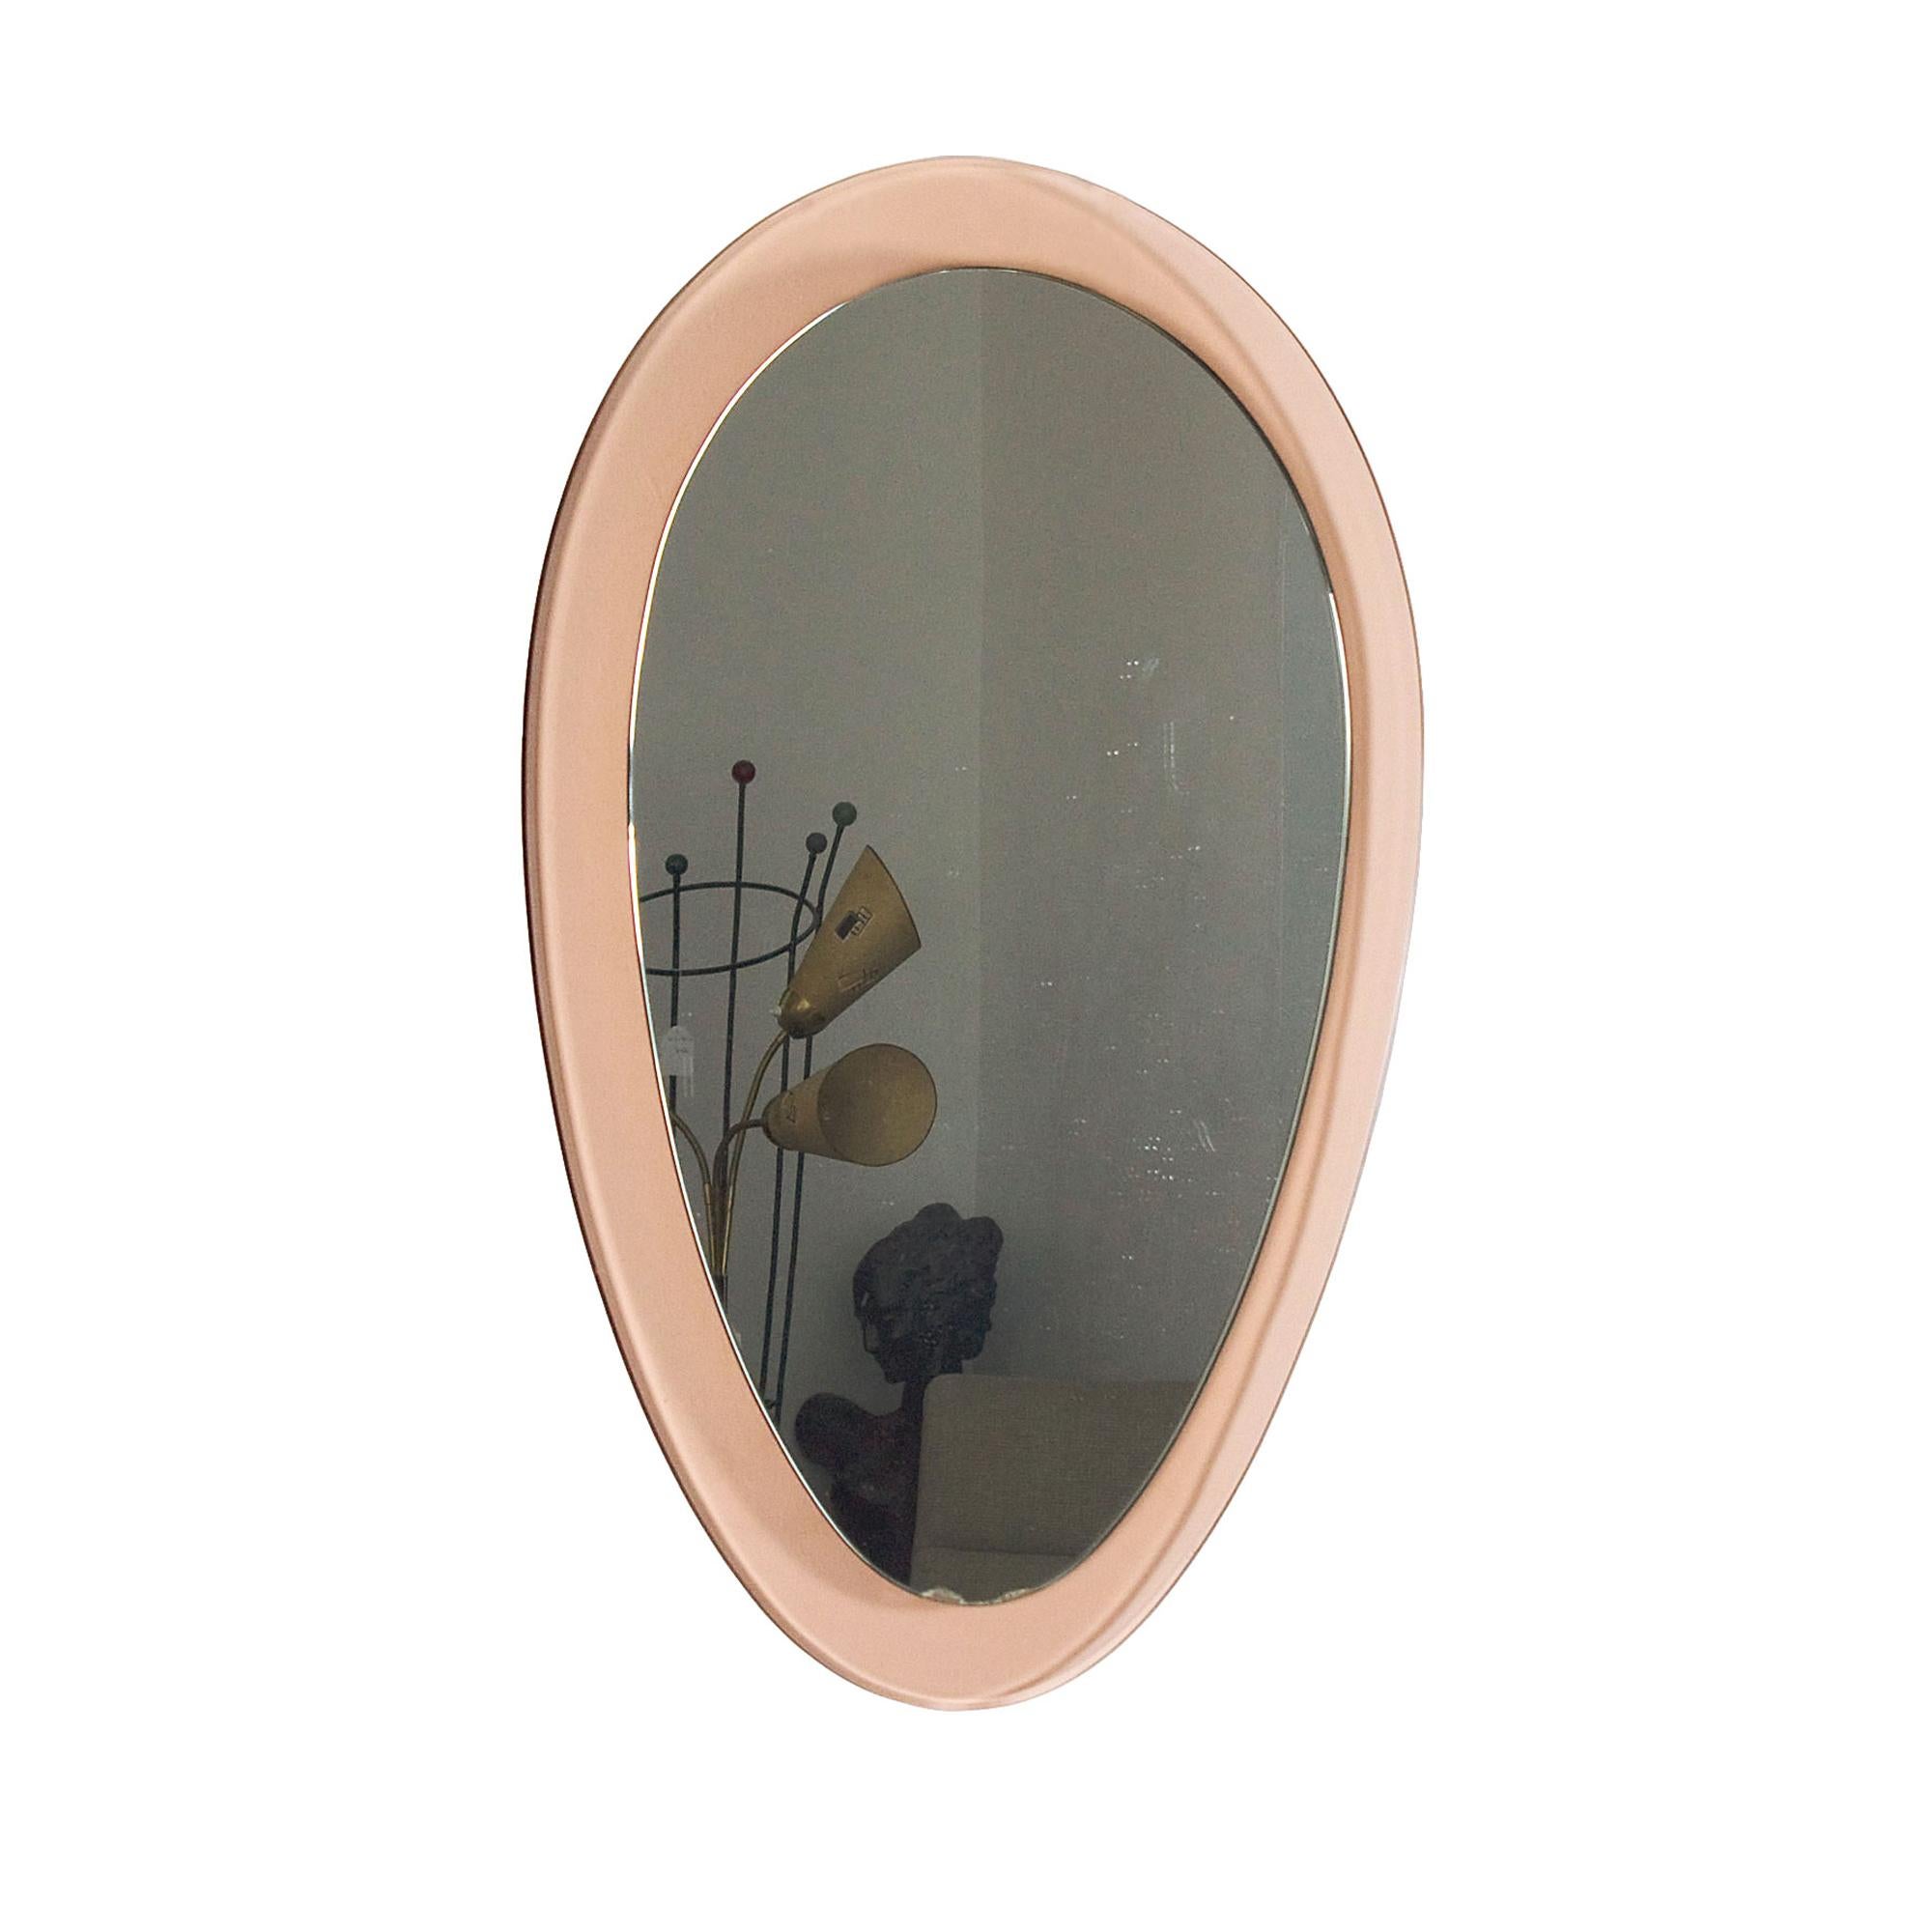 Rounded triangular mirror with a light pink transparent glass frame. Original oxidation.

Italy, c. 1960.